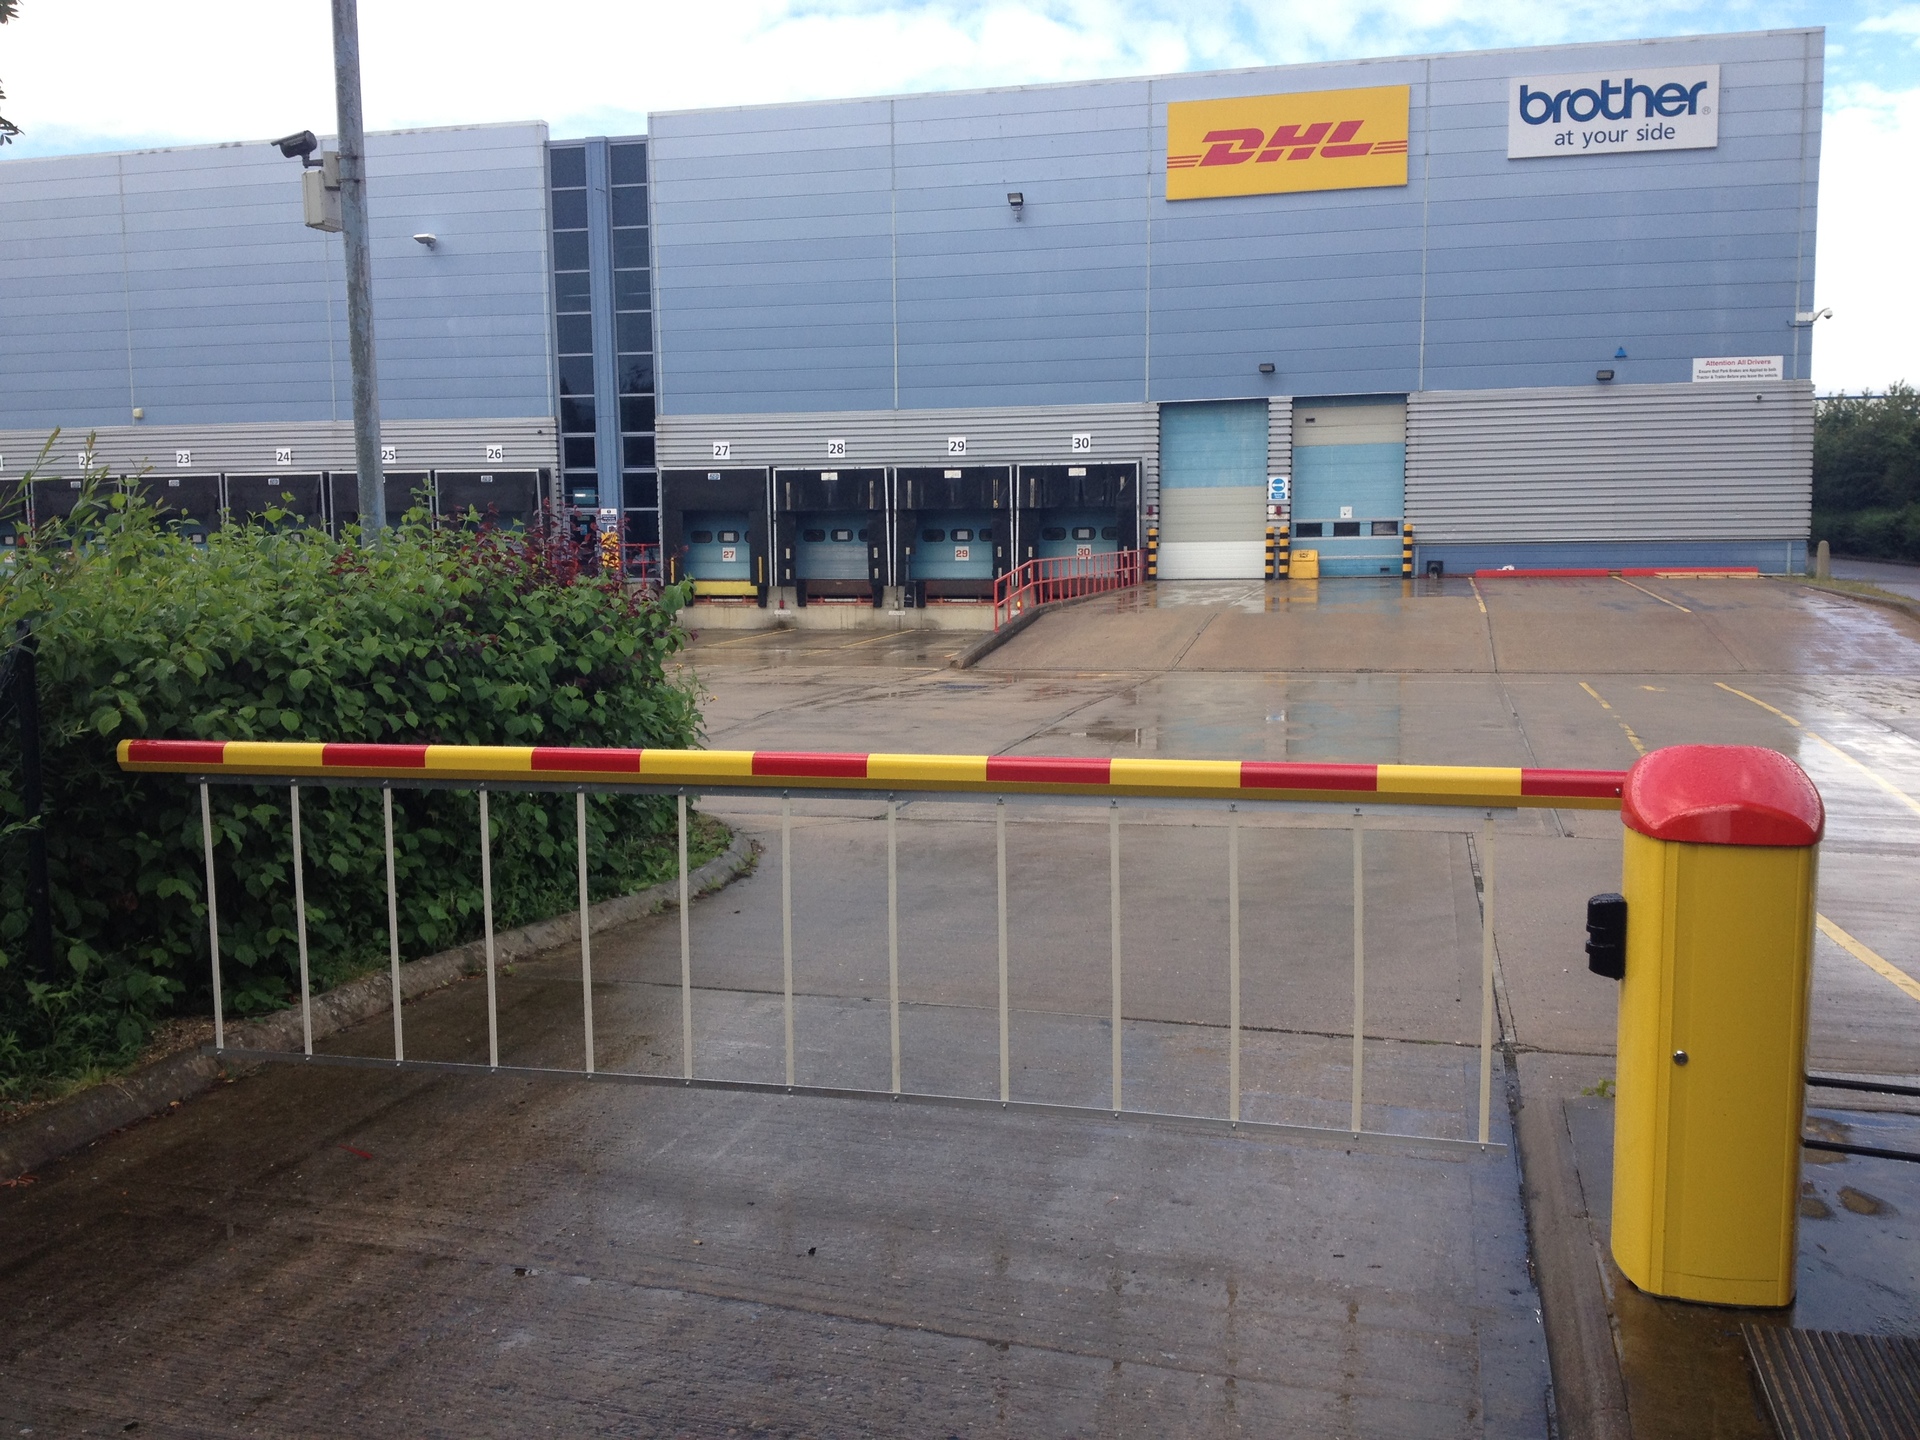 Senor controlled automatic barrier powder coated in company colours